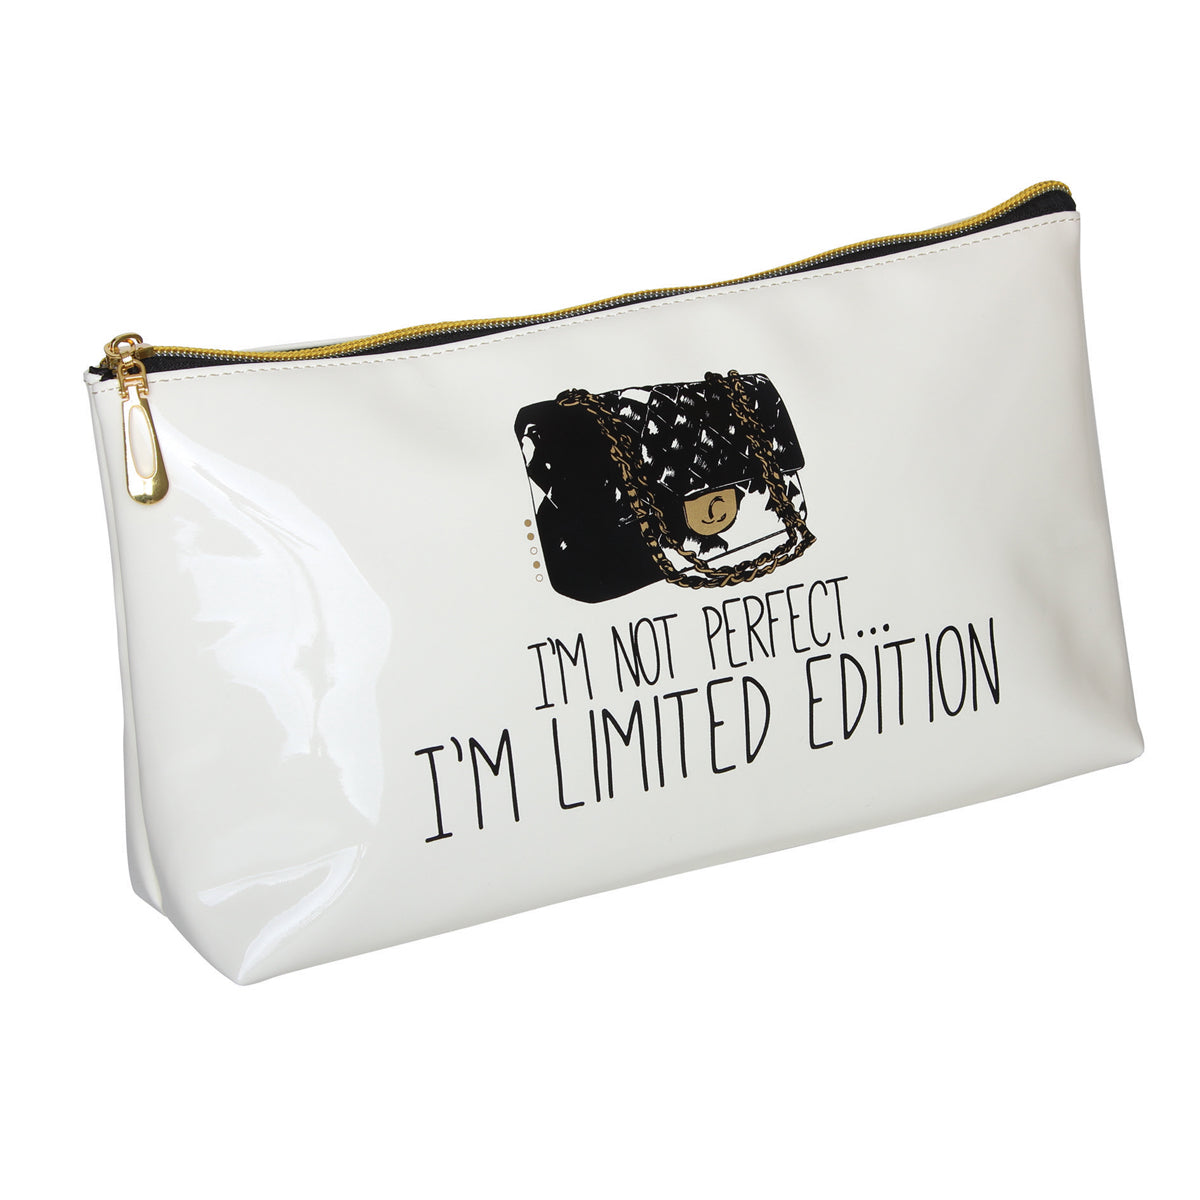 Fancy Metal Goods 'I'm Not Perfect....I'm Limited Edition' Cosmetic/Toiletry Bag